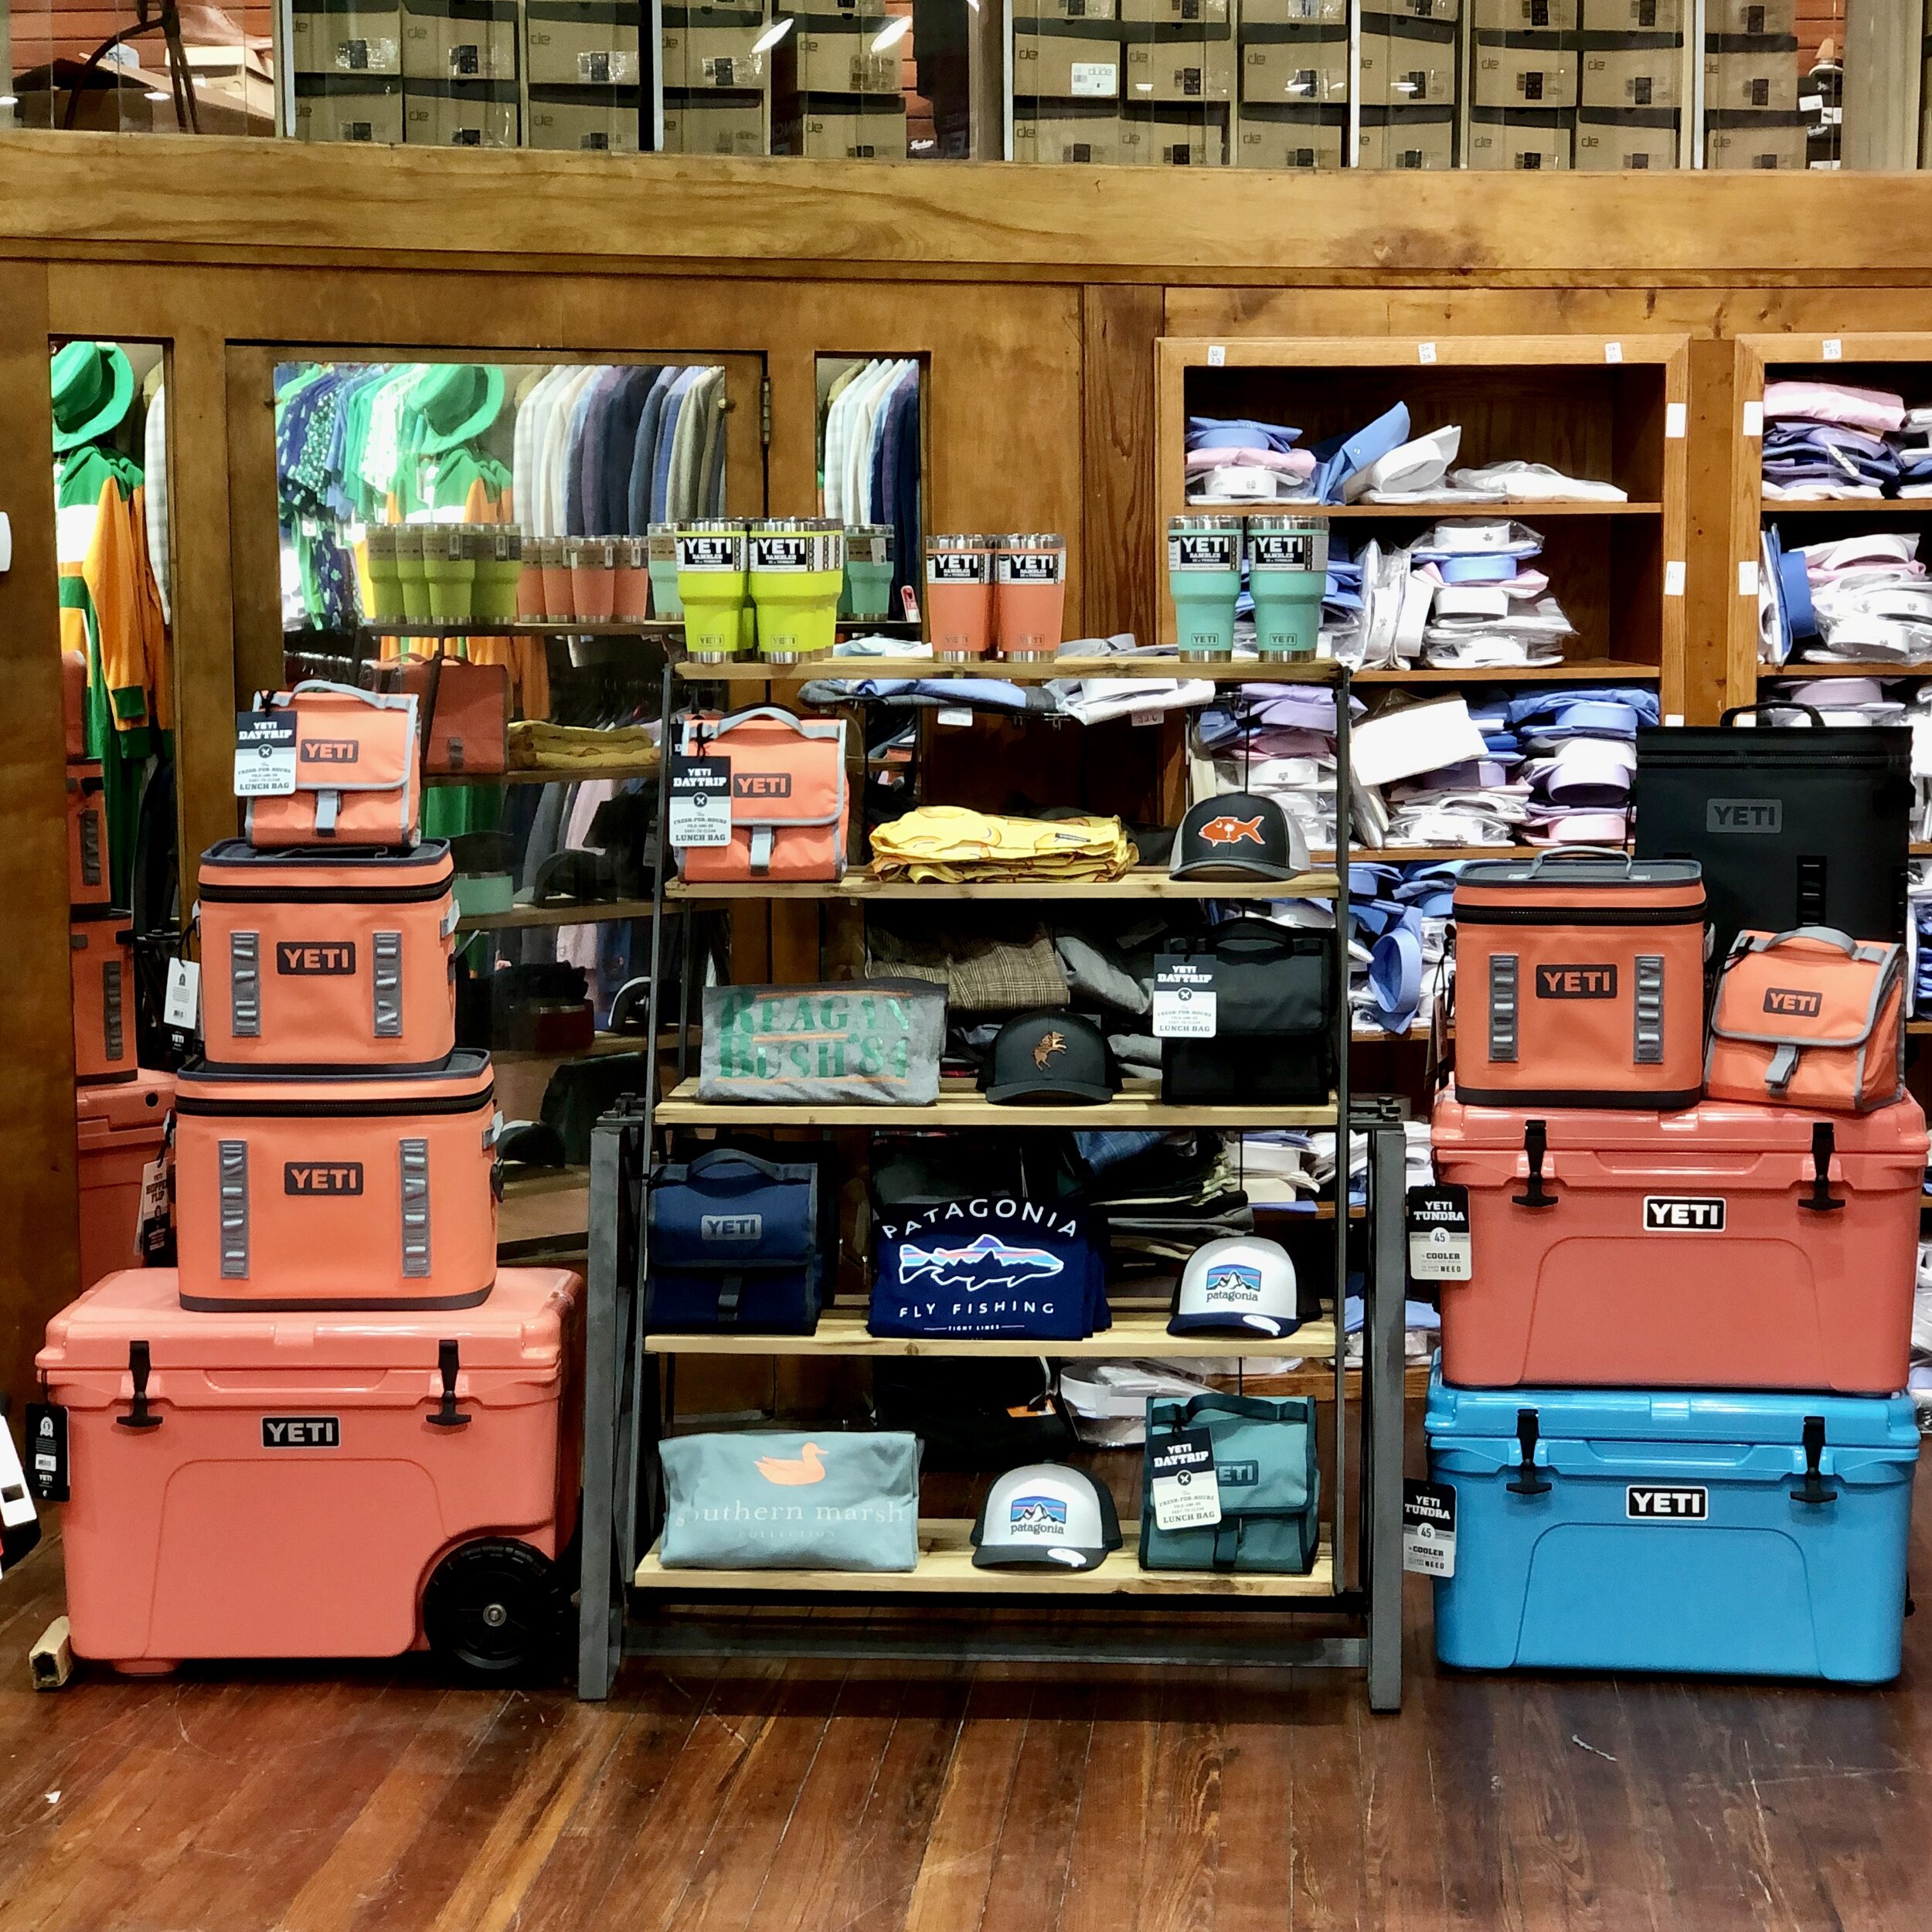 Joseph S Clothier Limited Edition Coral Yeti Coolers The Inspiration Behind Coral